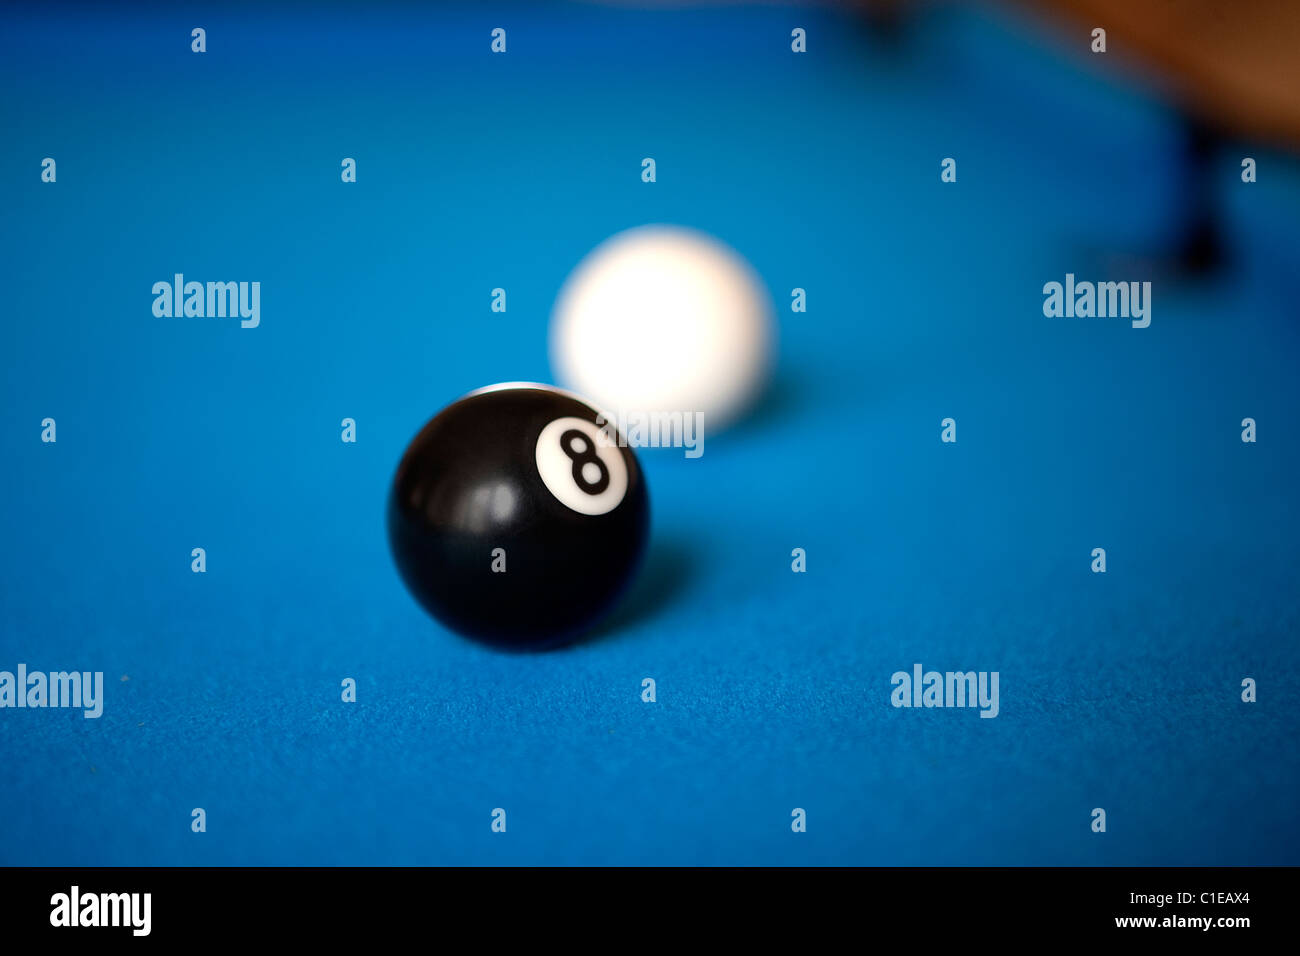 8 Ball Pool Game Images – Browse 21,849 Stock Photos, Vectors, and Video